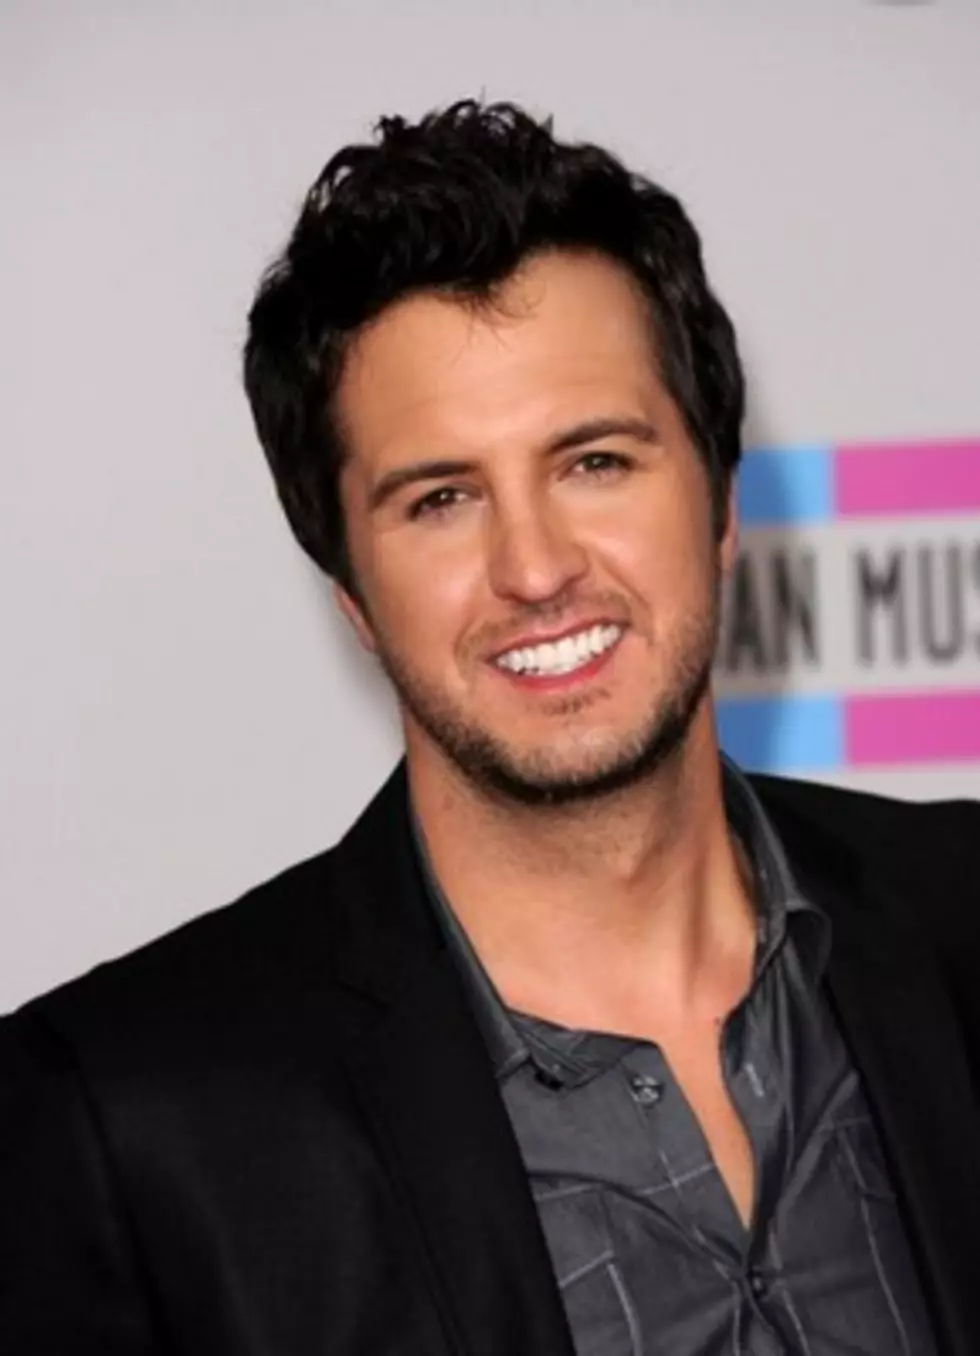 &#8220;I Don&#8217;t Want This Night To End&#8221; #1 for Luke Bryan